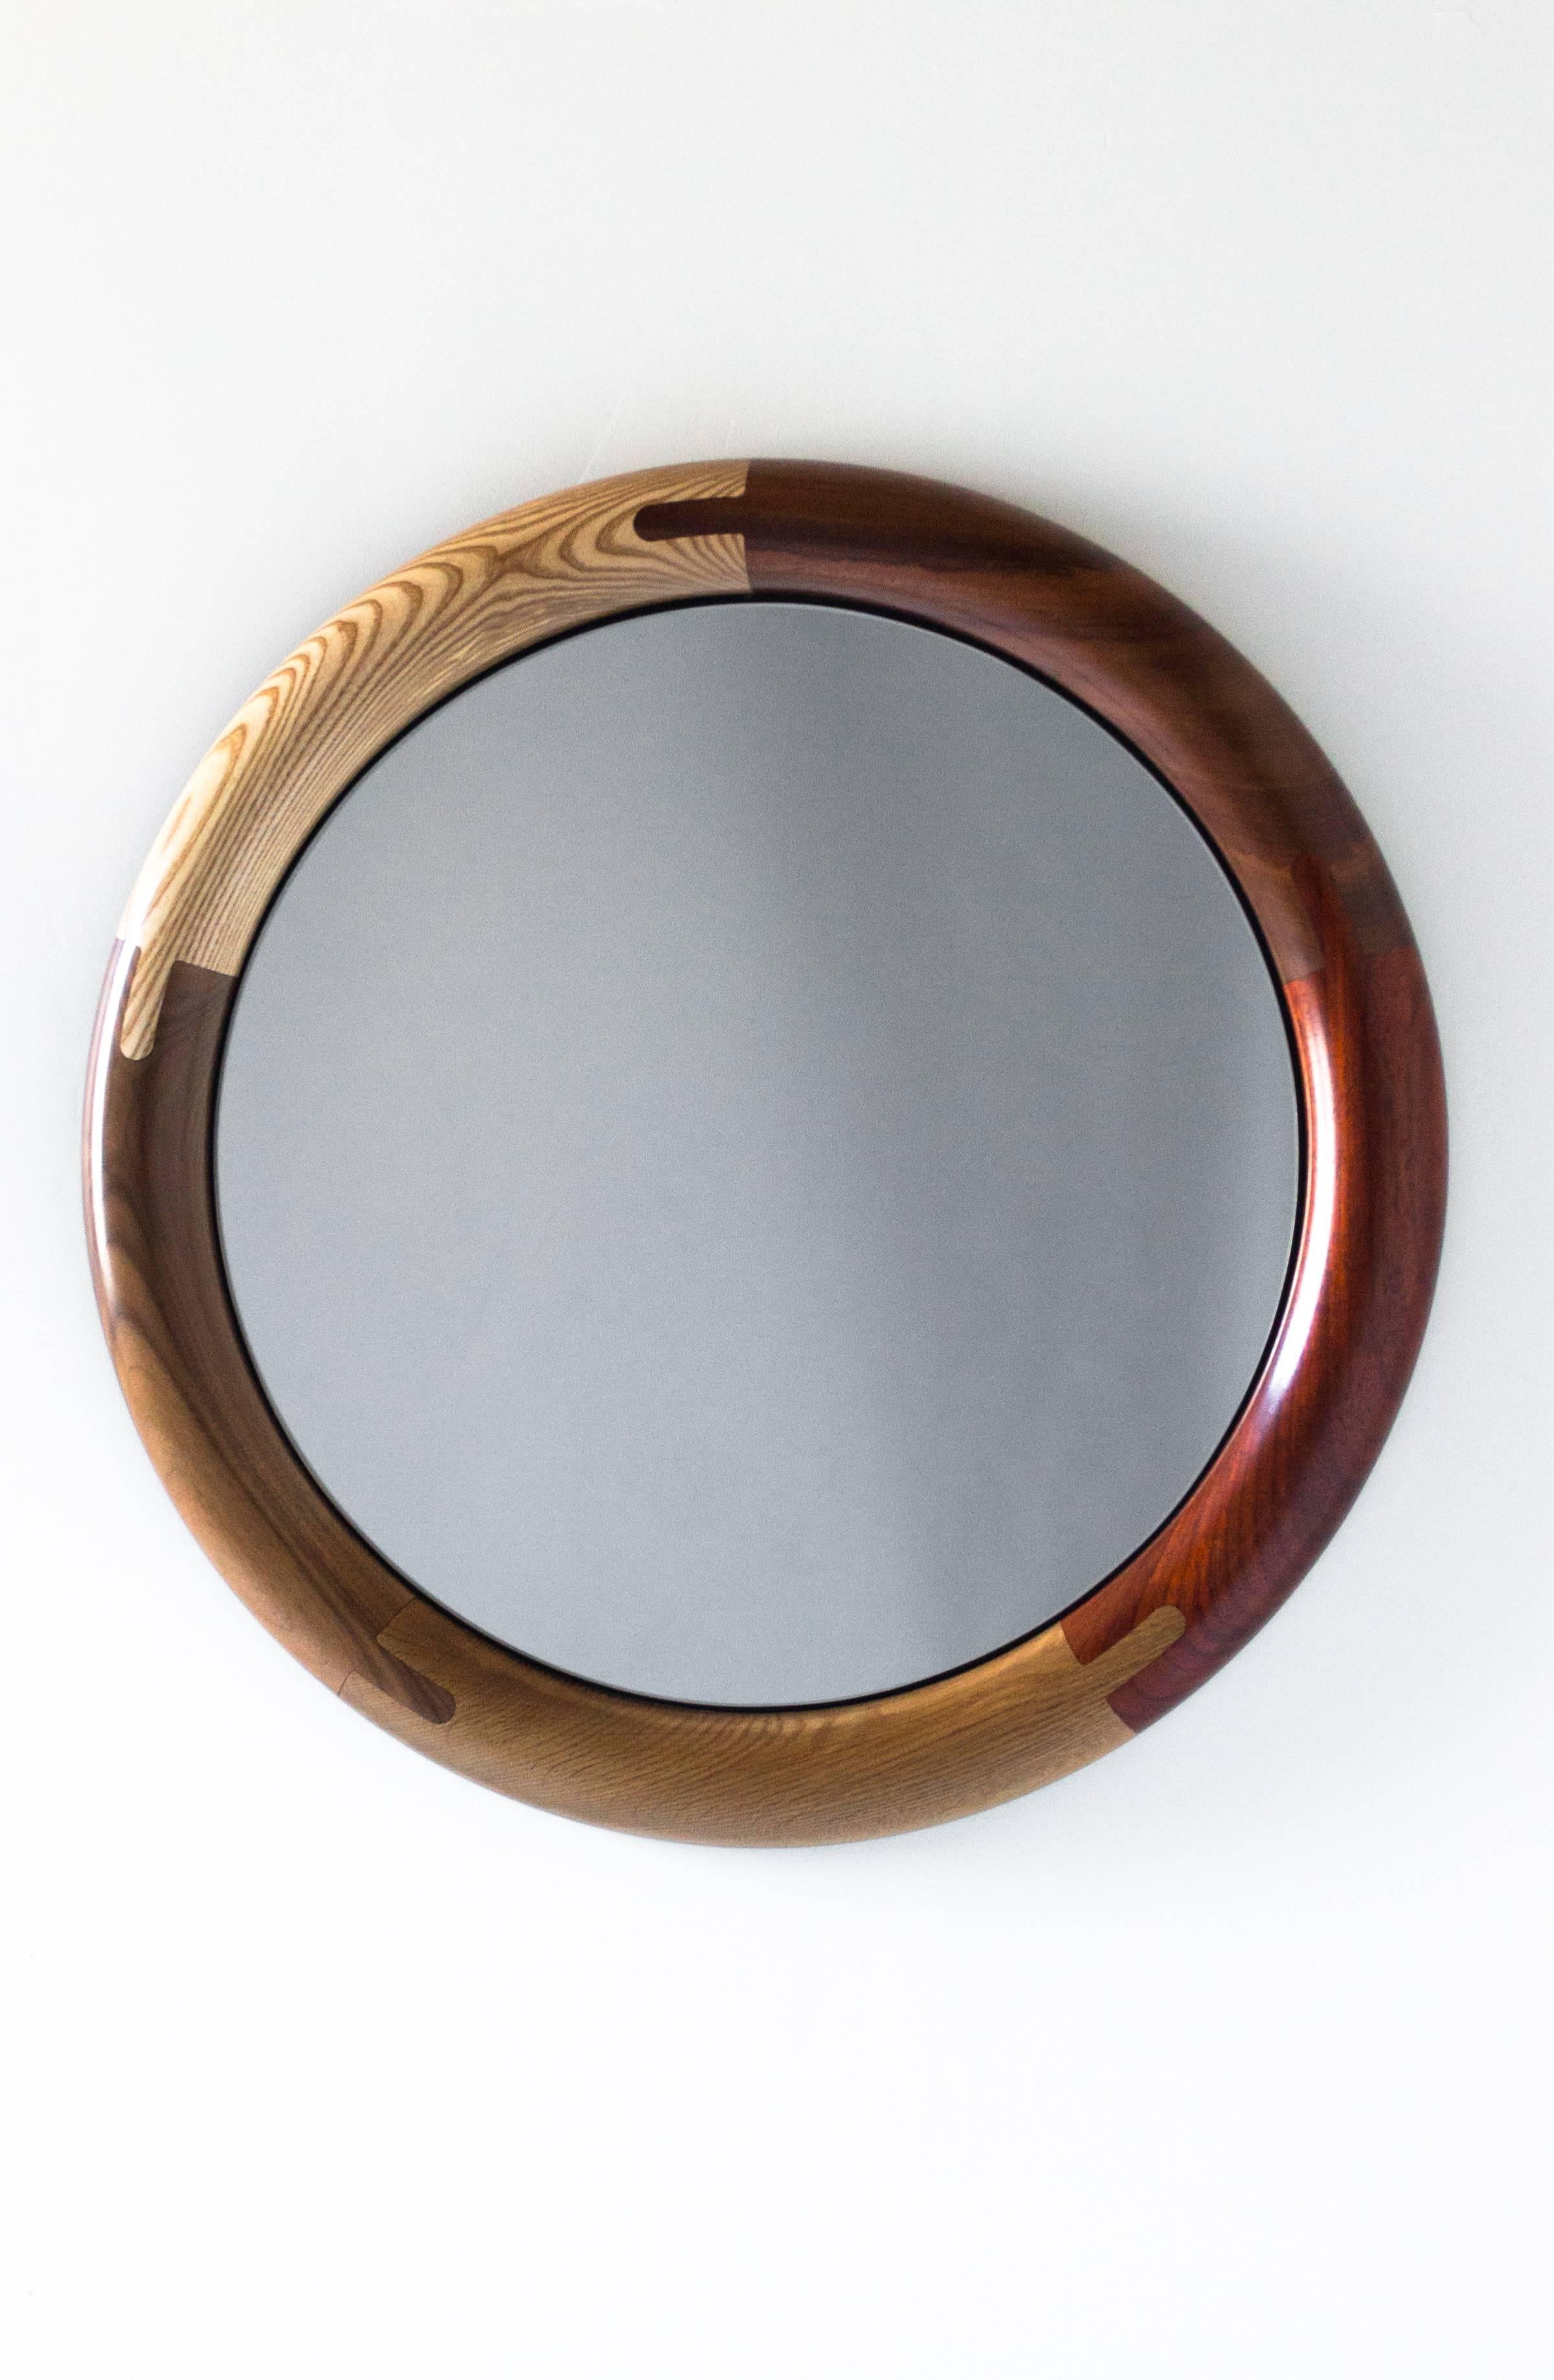 Composed of a richly colored range of wood species and featuring detailed joinery and simple, legible construction, the Halo Round Mirror makes you look good just for owning it.